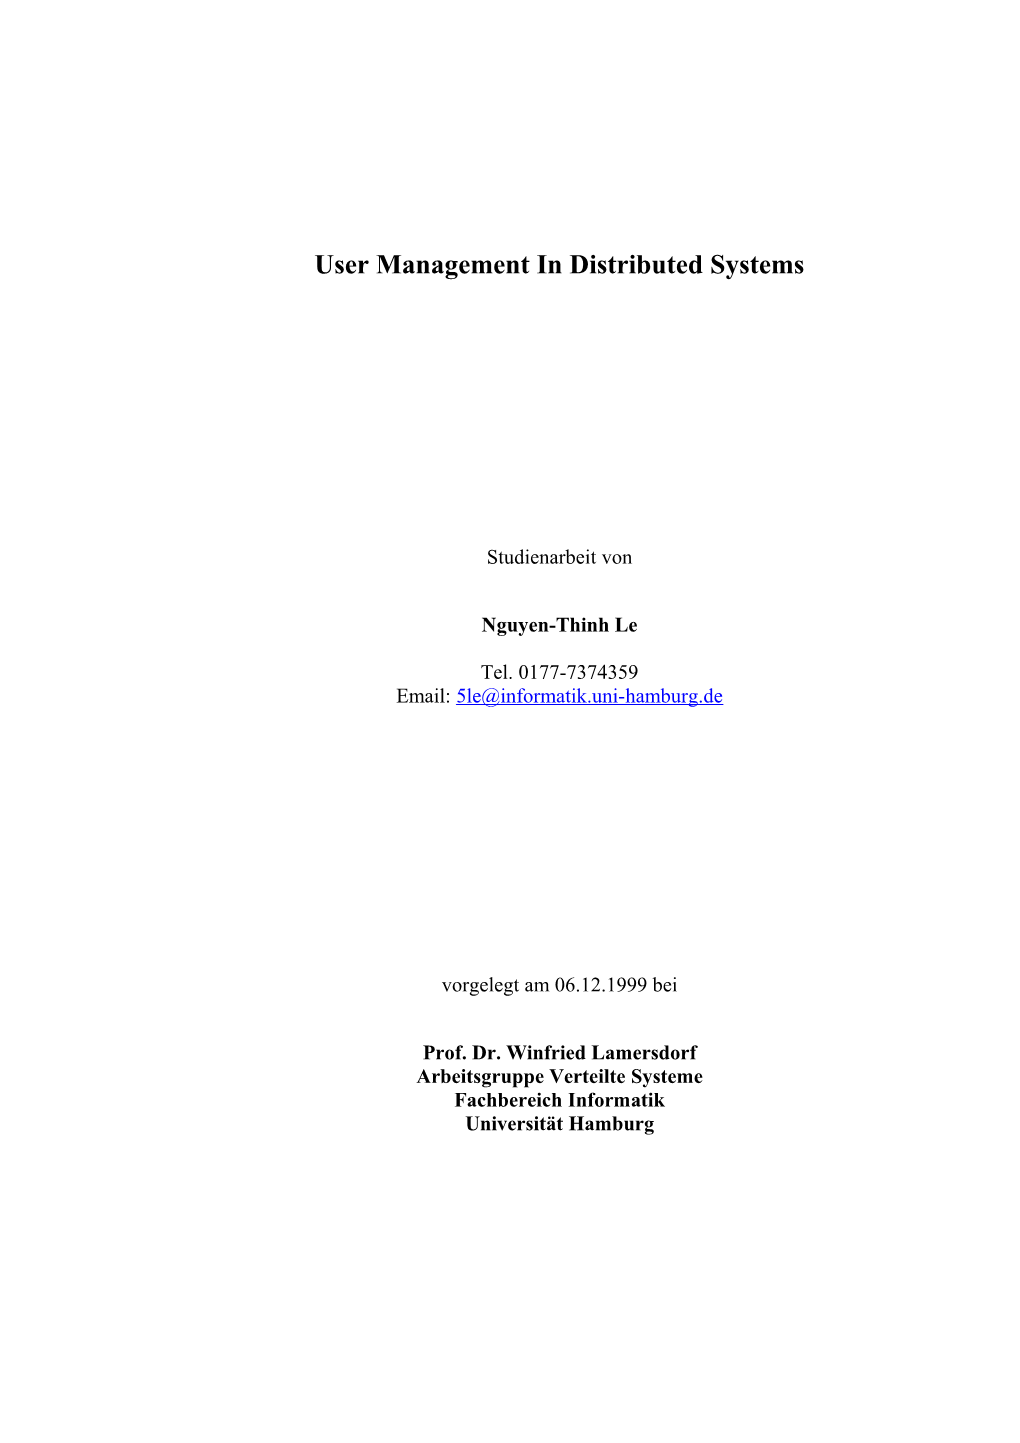 User Management in Distributed Systems